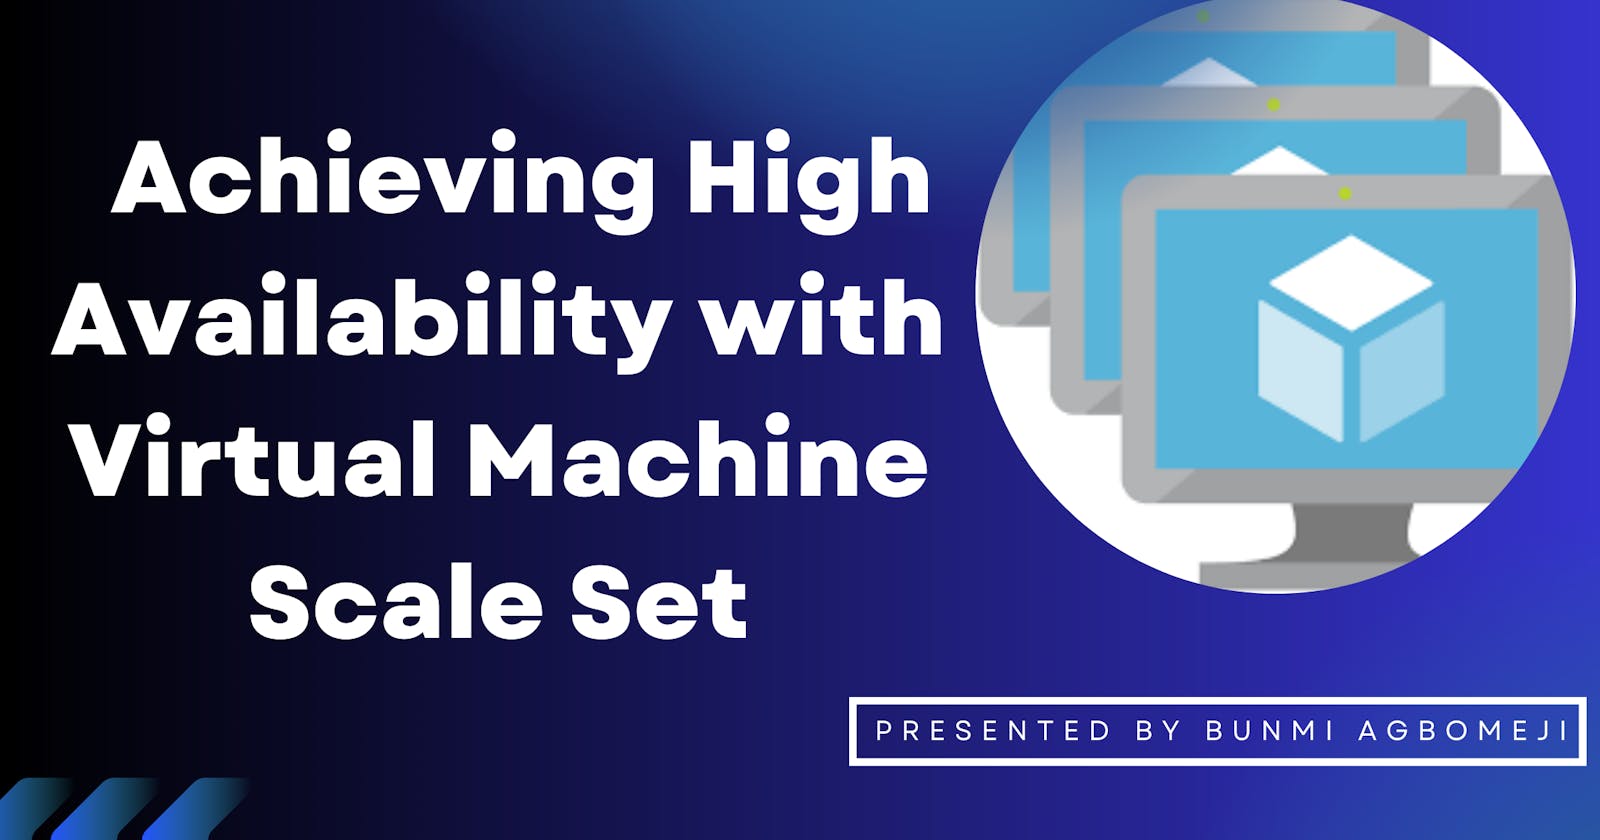 Achieving High Availability with Virtual Machine Scale Sets